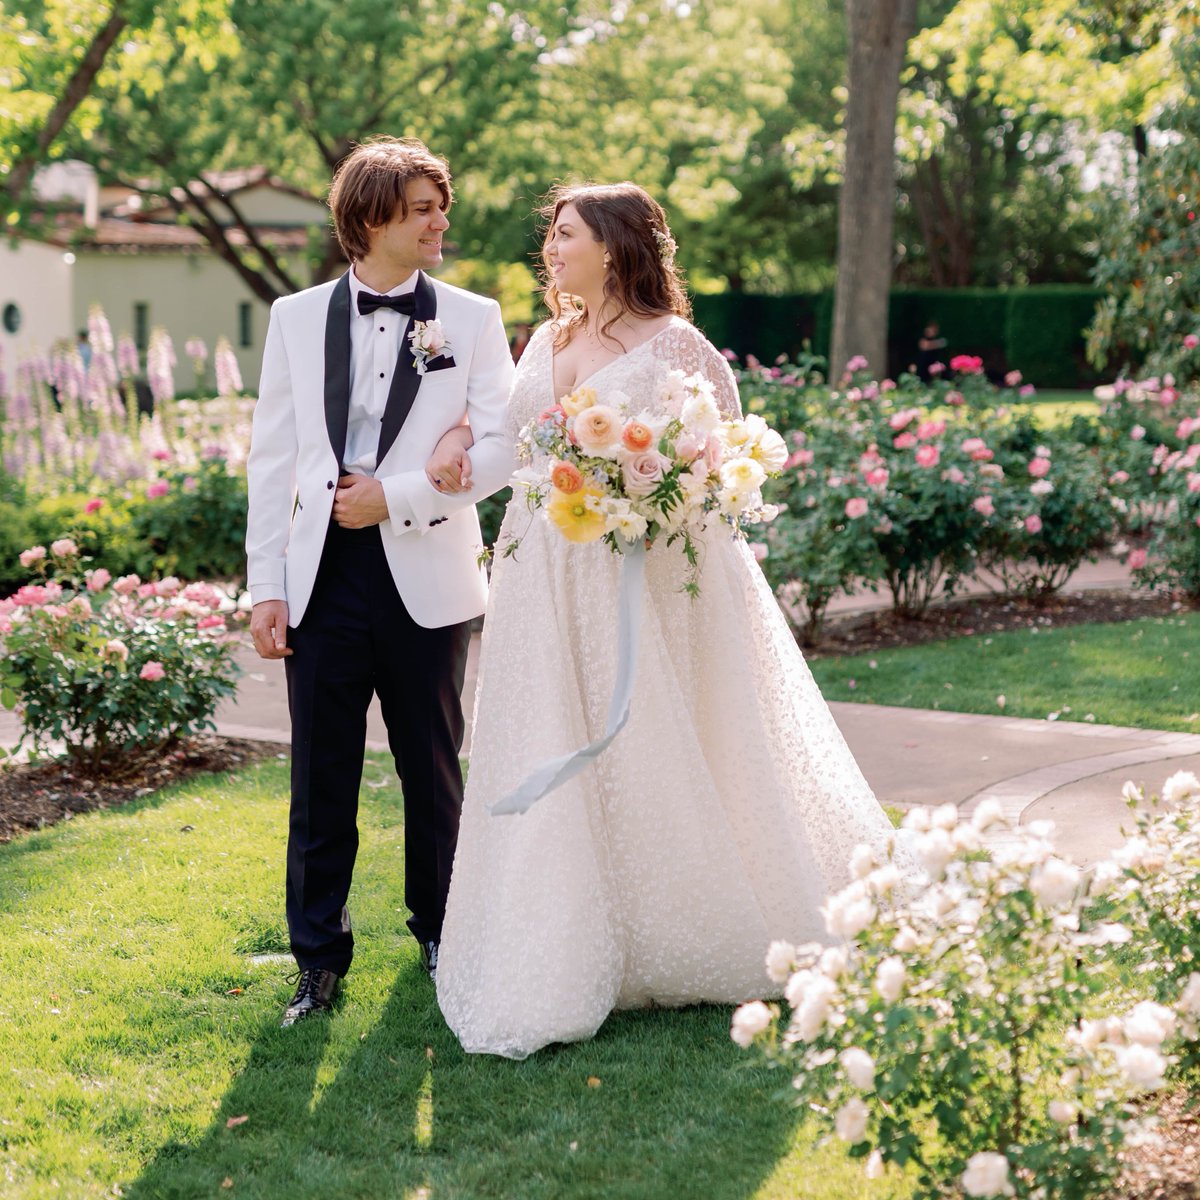 It all started with a single rose, and now, you're surrounded by roses on your wedding day 🌹 ❤️ Let us help bring your dream wedding to life at the Dallas Arboretum: dallasarboretum.org/weddings/ 📸: Stephanie Brazzle Photography